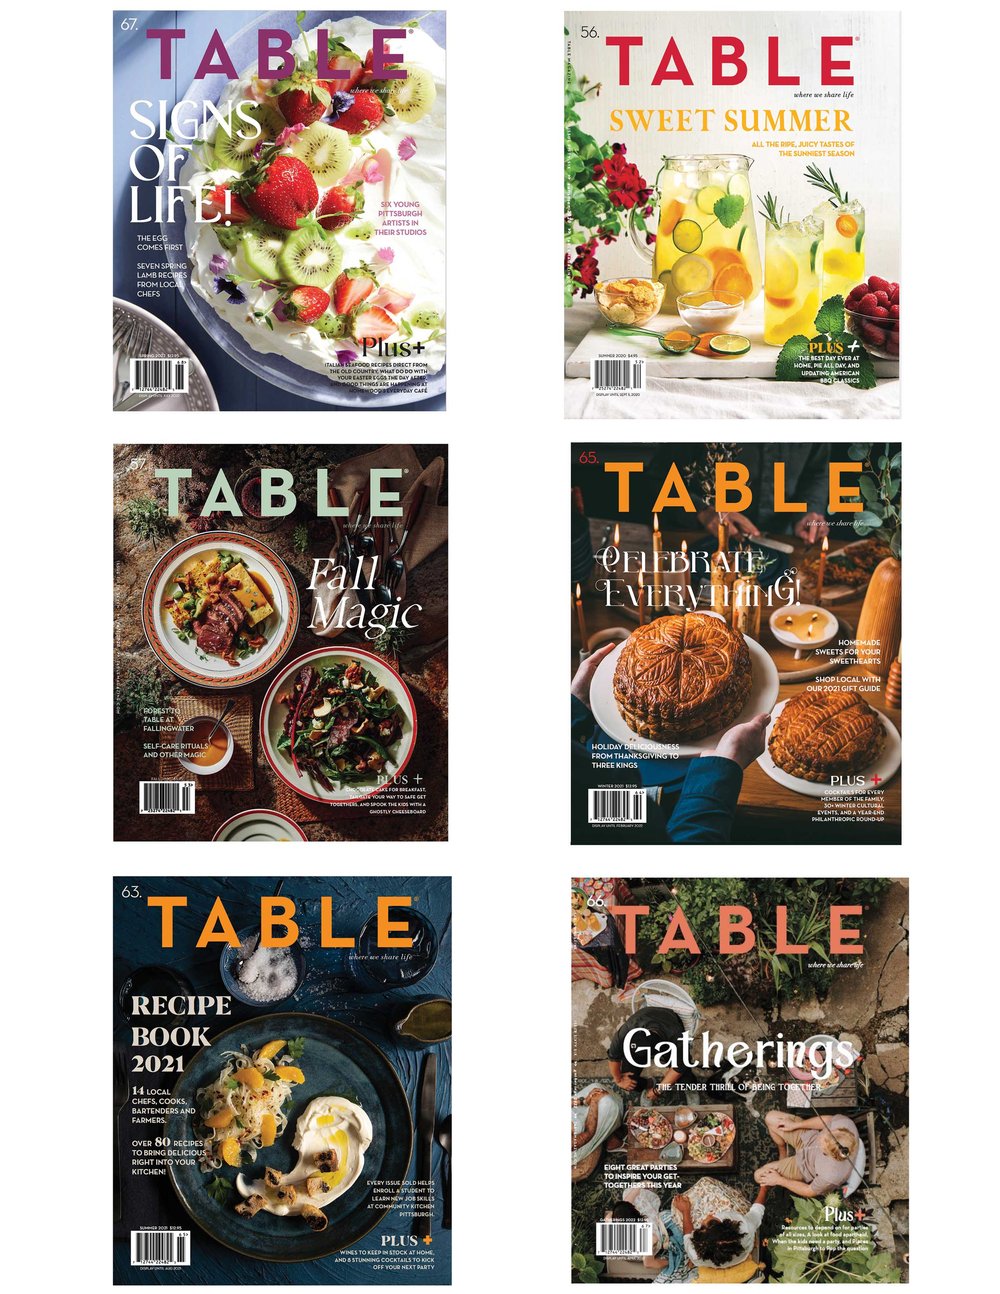 TABLE Magazine - ANNUAL Subscription (with auto-renewal)